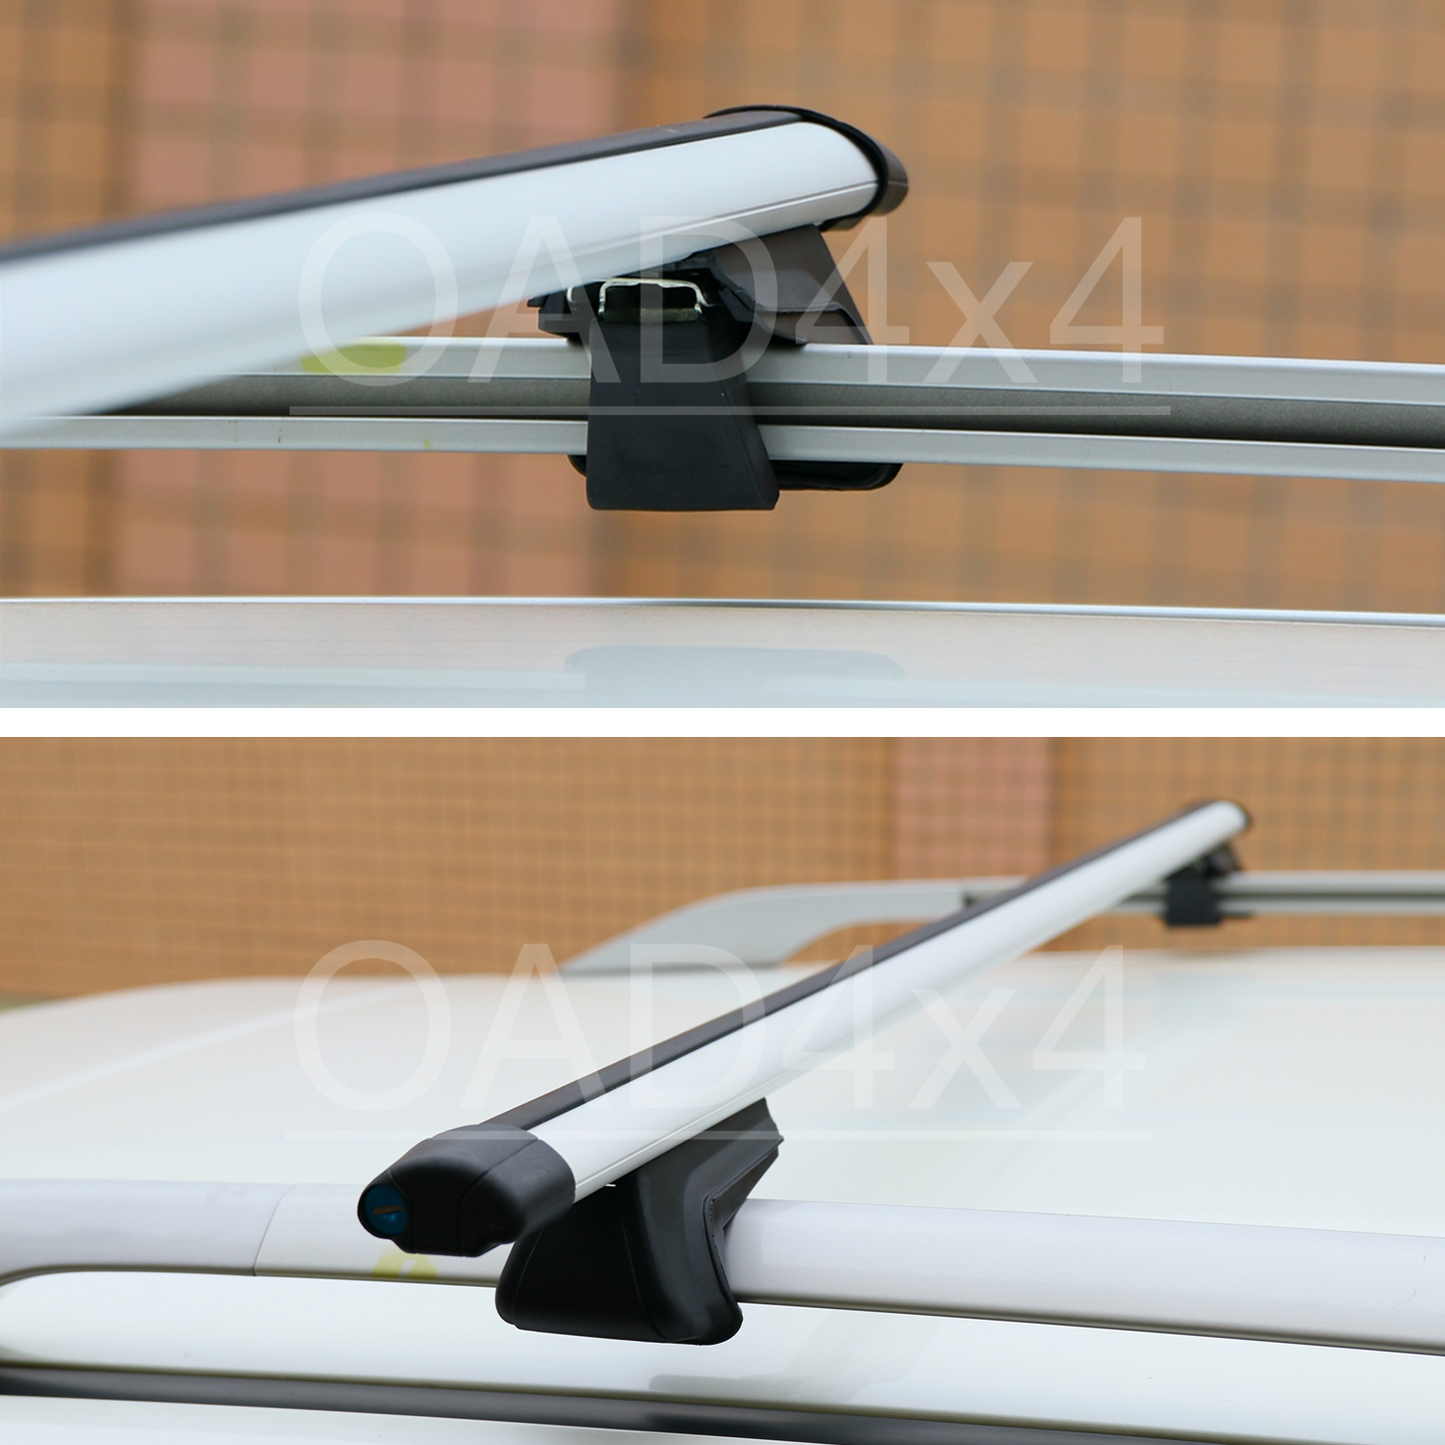 1 Pair Aluminum Silver Cross Bar Roof Racks Baggage holder for Peugeot 307 wagon with raised roof rail